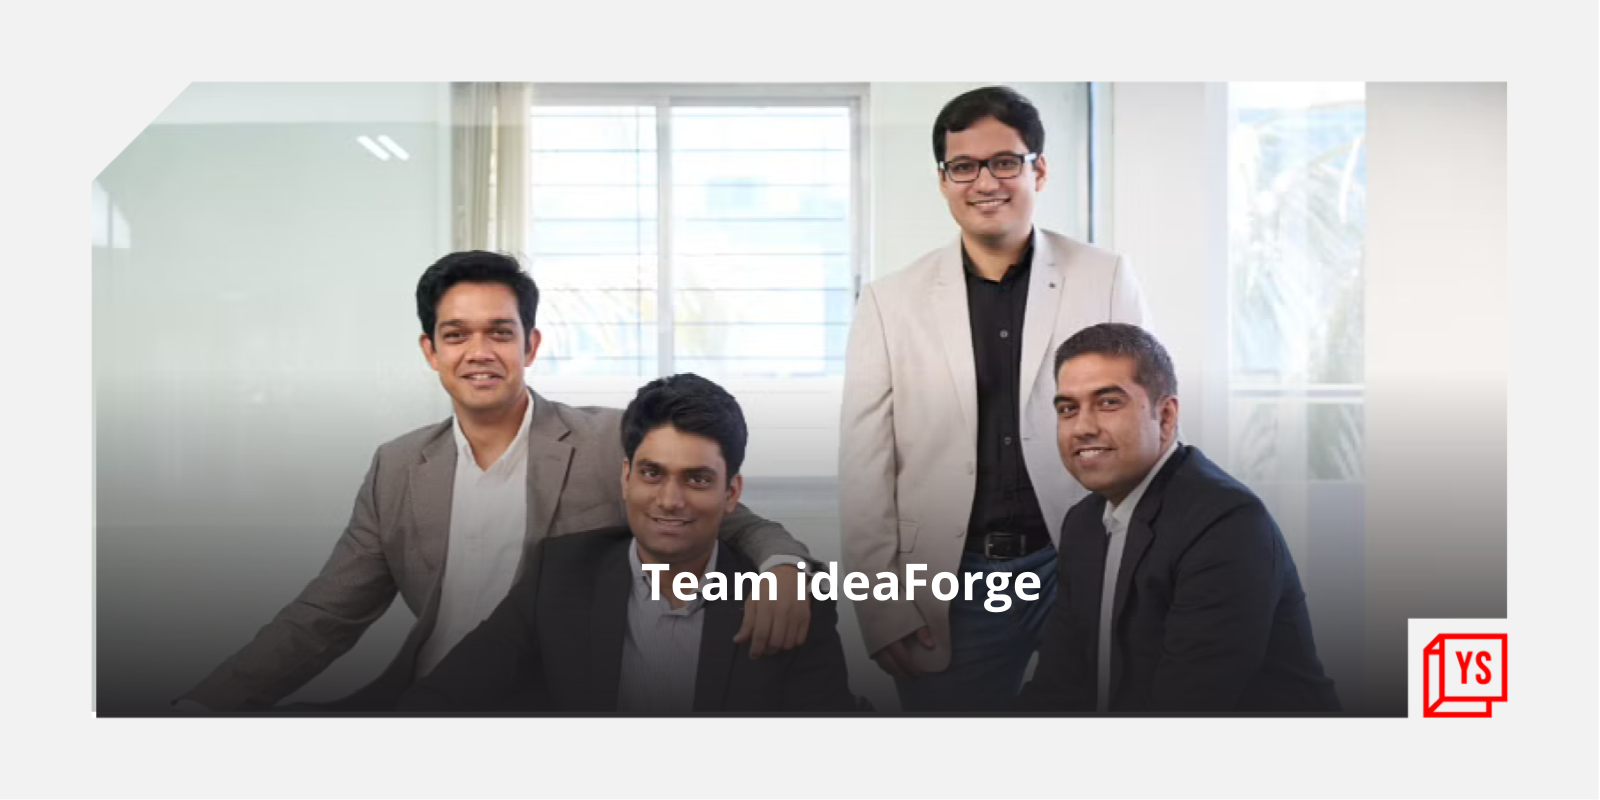 [Jobs Roundup] Check these openings at drone manufacturing startup ﻿ideaForge